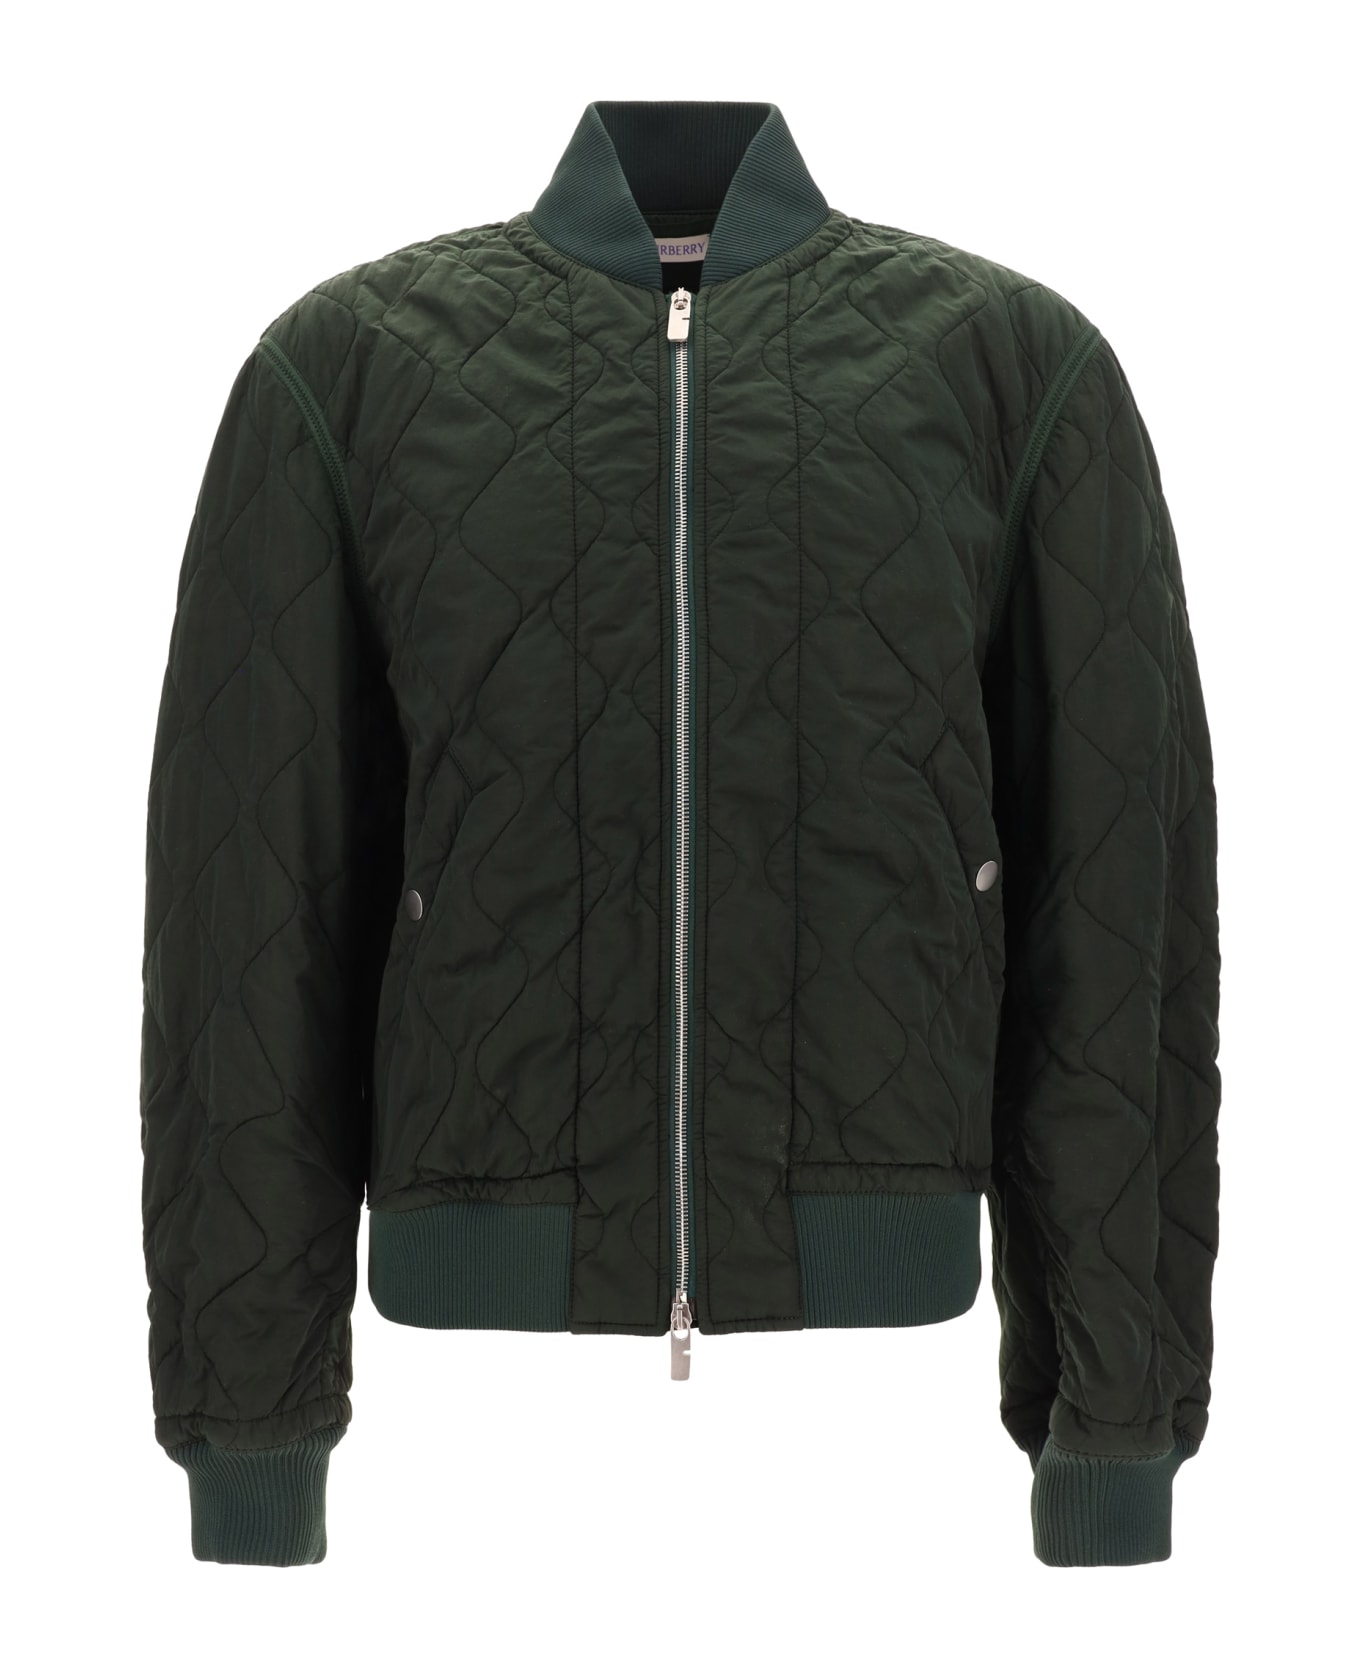 Burberry Long Sleeved Quilted Zip-up Bomber Jacket - Ivy